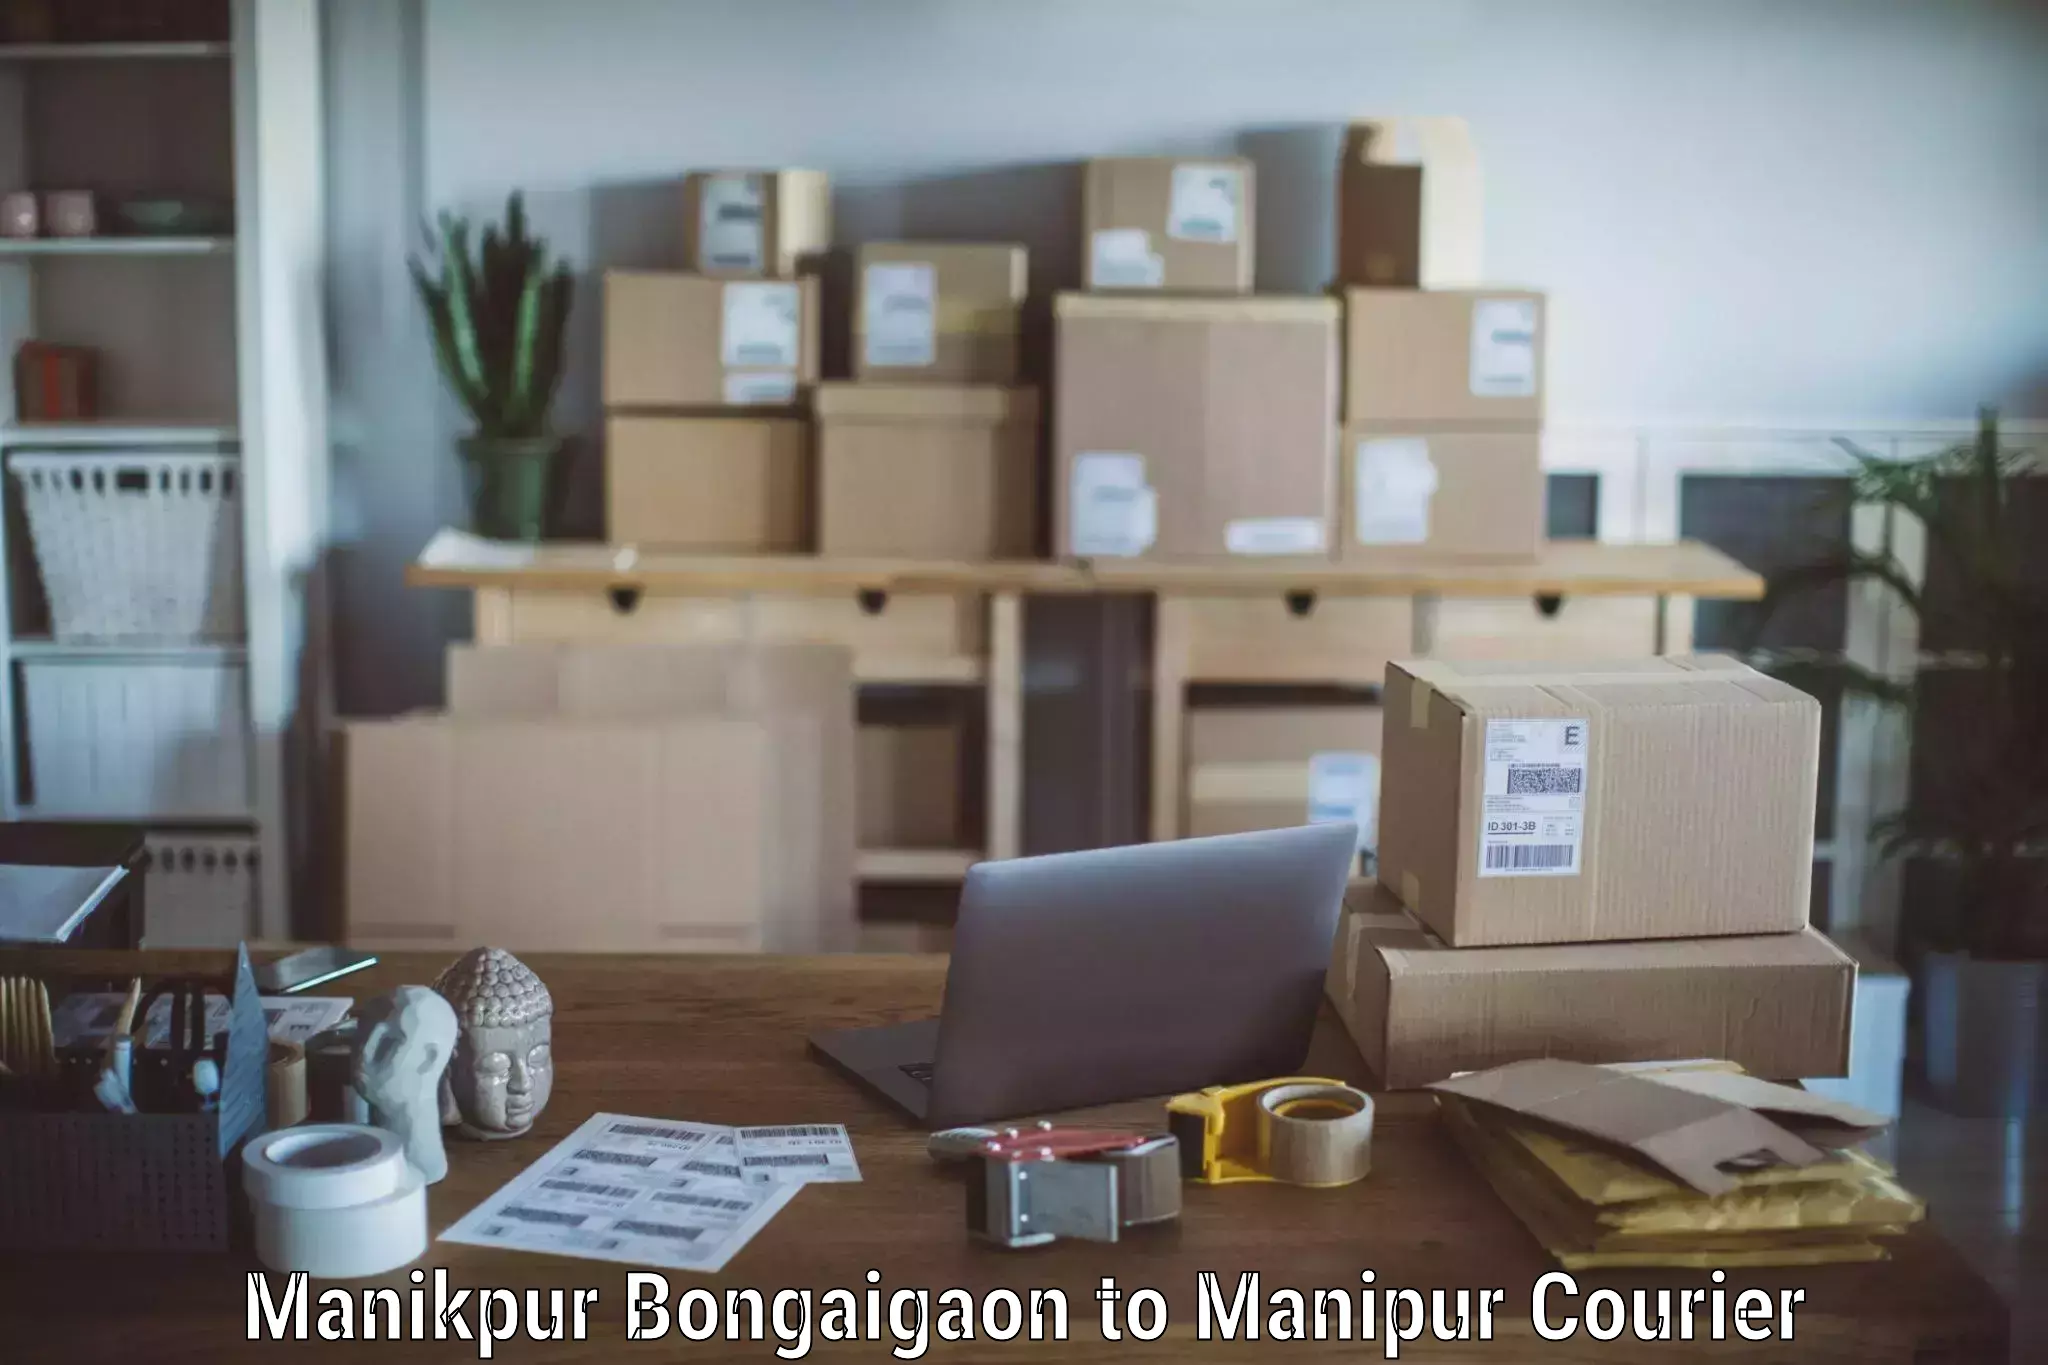 Professional packing and transport in Manikpur Bongaigaon to Manipur